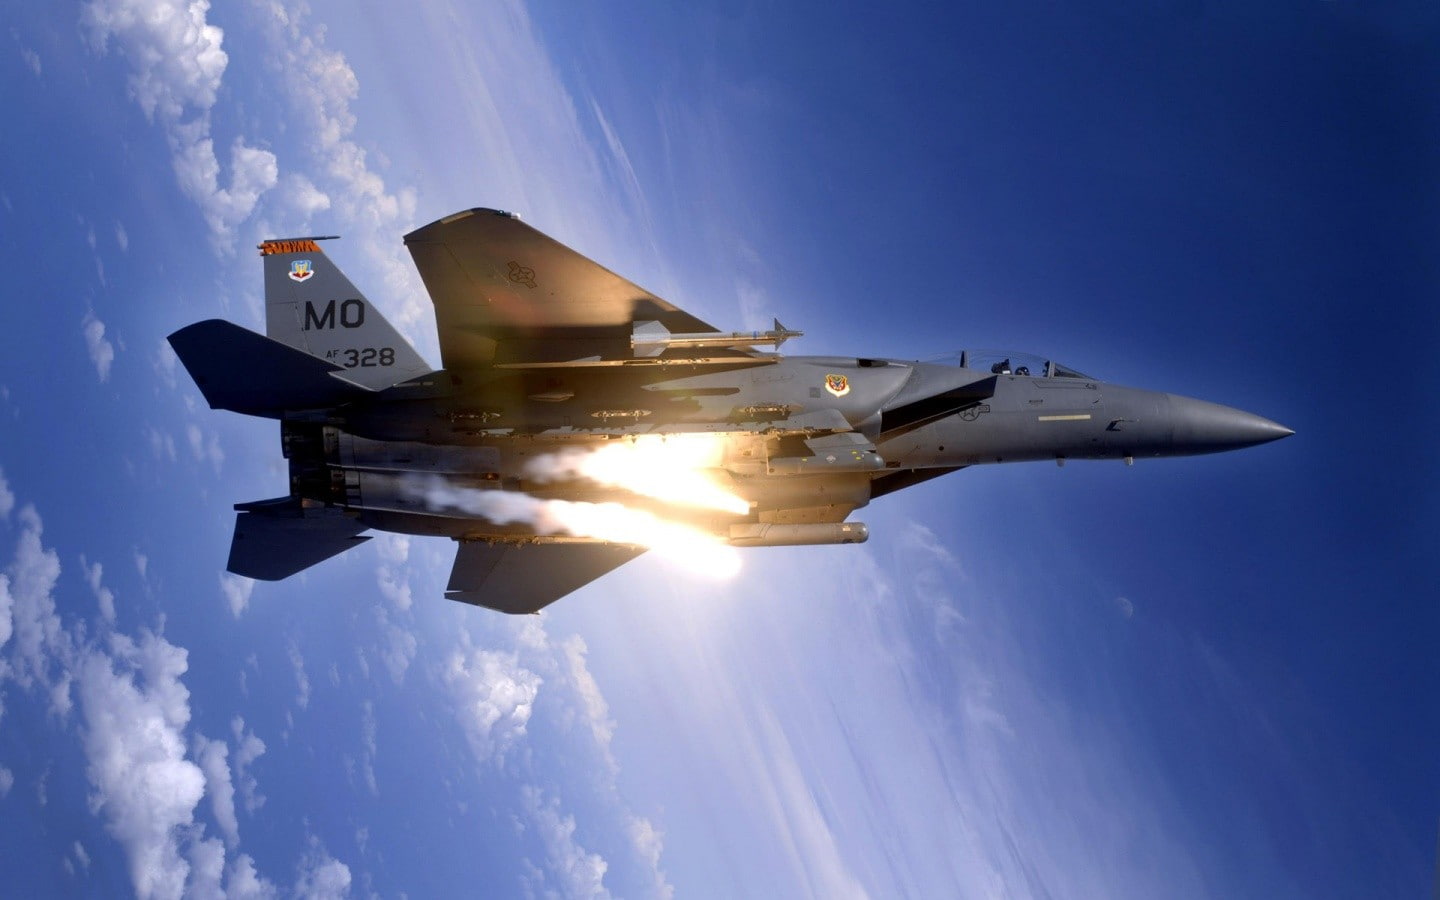 war, missiles, airplane, blue, clouds, clear sky, flares, F-15 Eagle